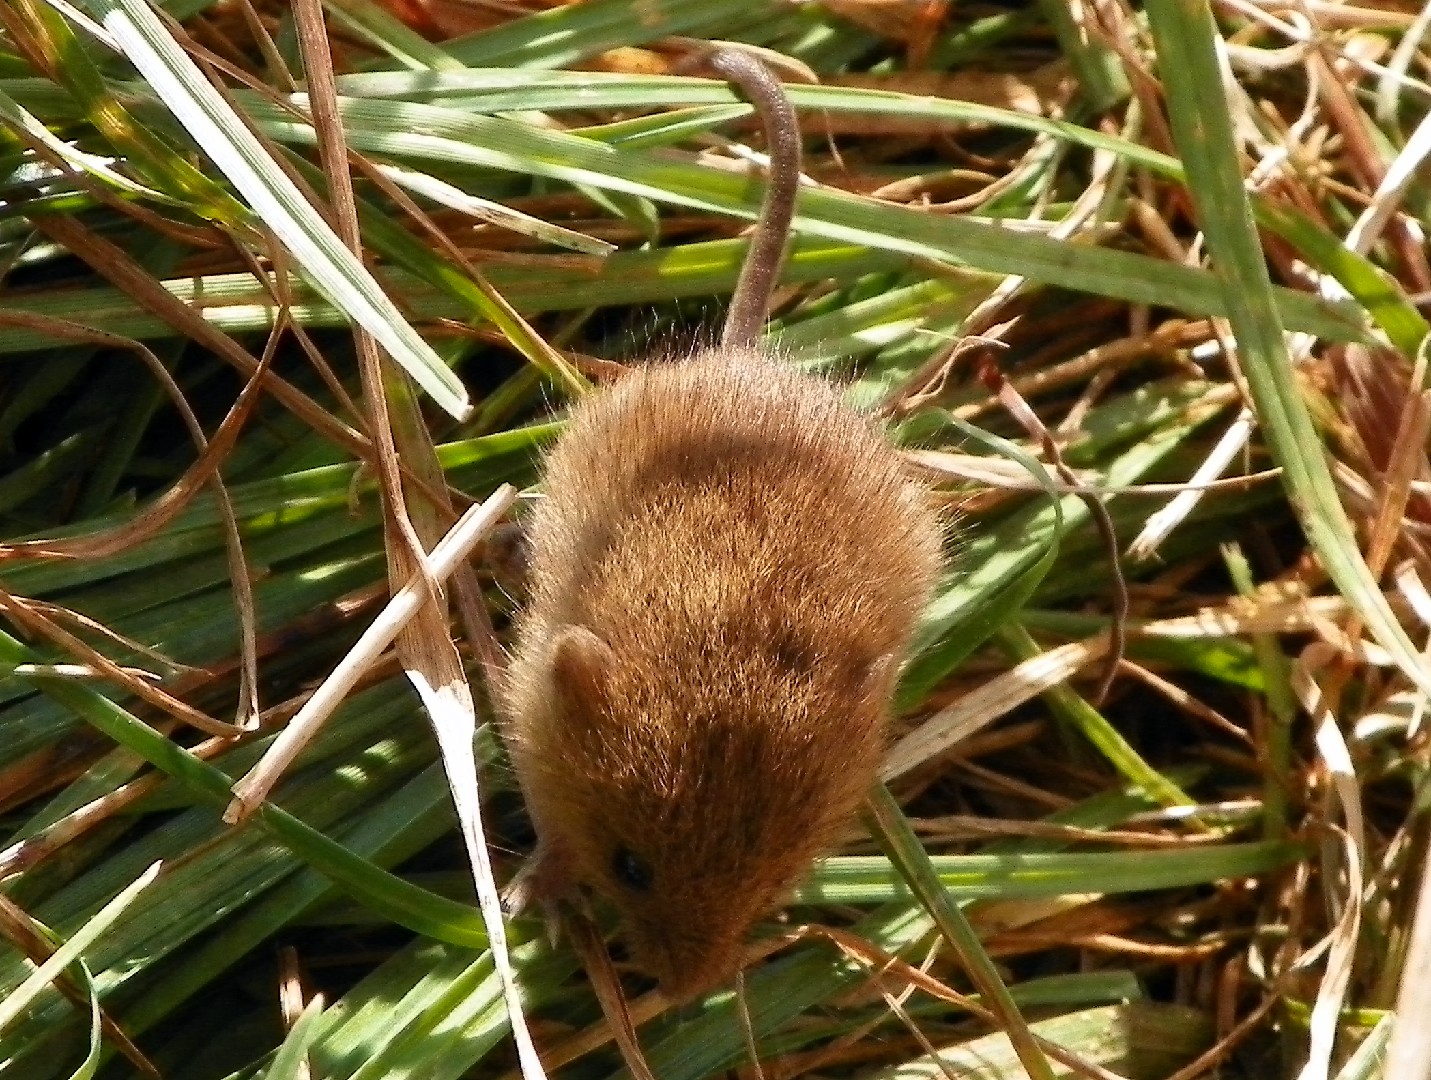 Red-backed voles (Myodes)